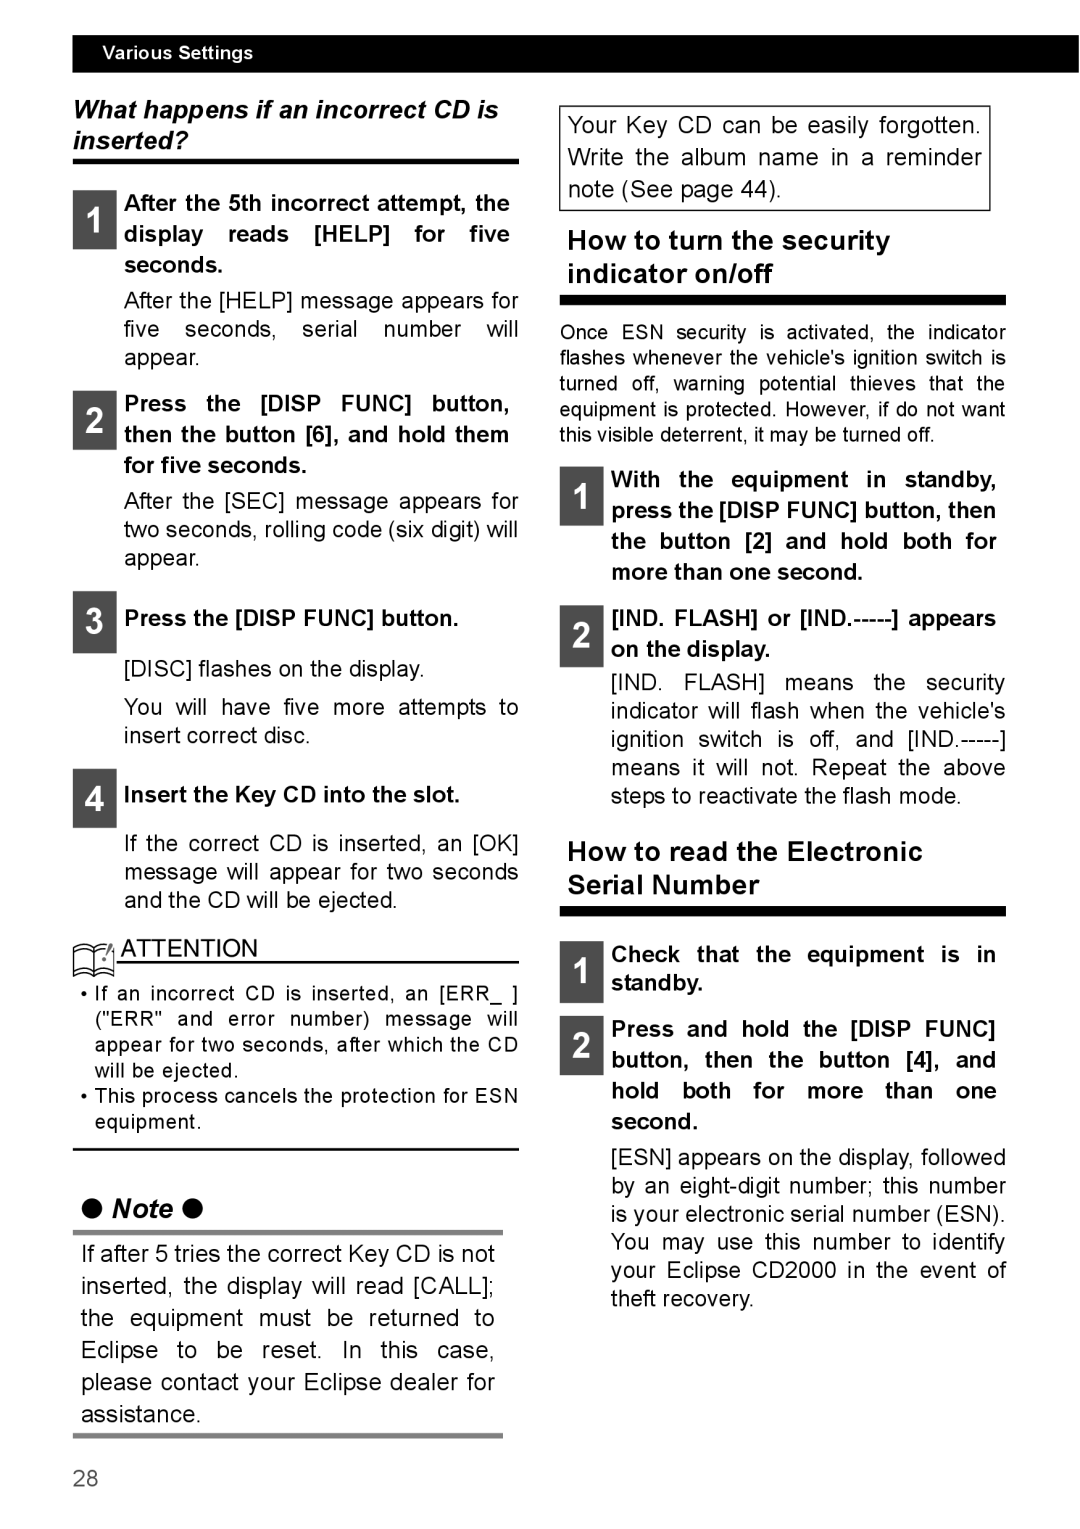 Eclipse - Fujitsu Ten CD2000 manual How to turn the security indicator on/off, How to read the Electronic Serial Number 